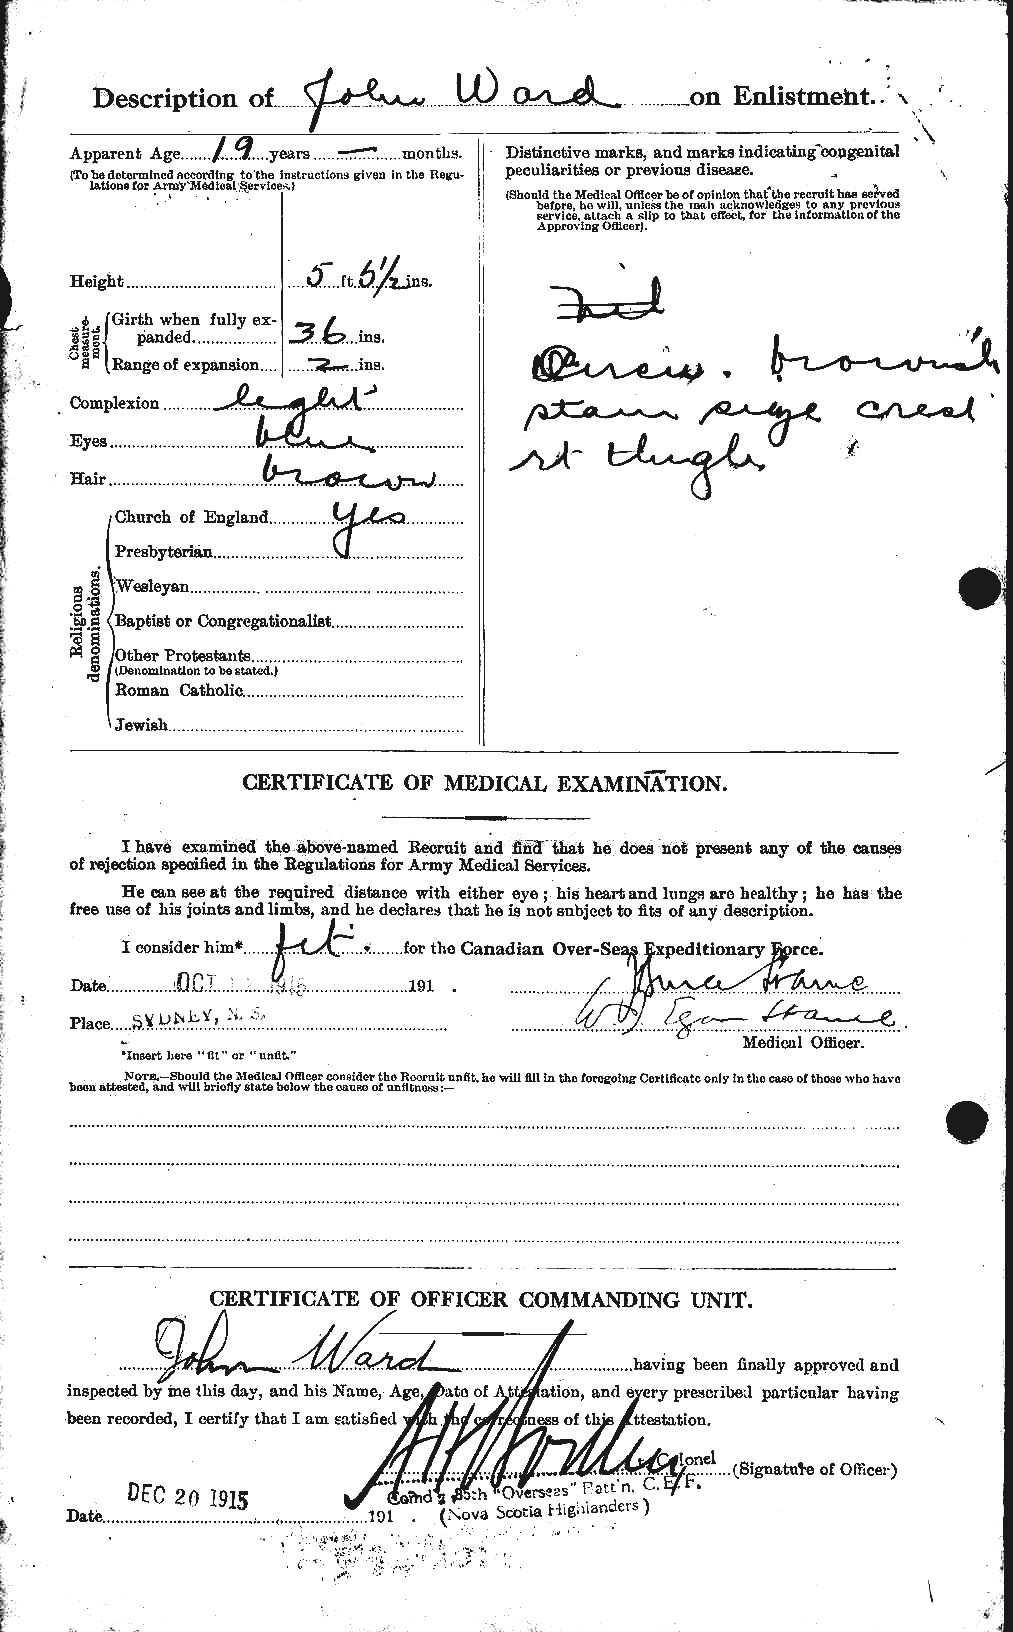 Personnel Records of the First World War - CEF 659495b